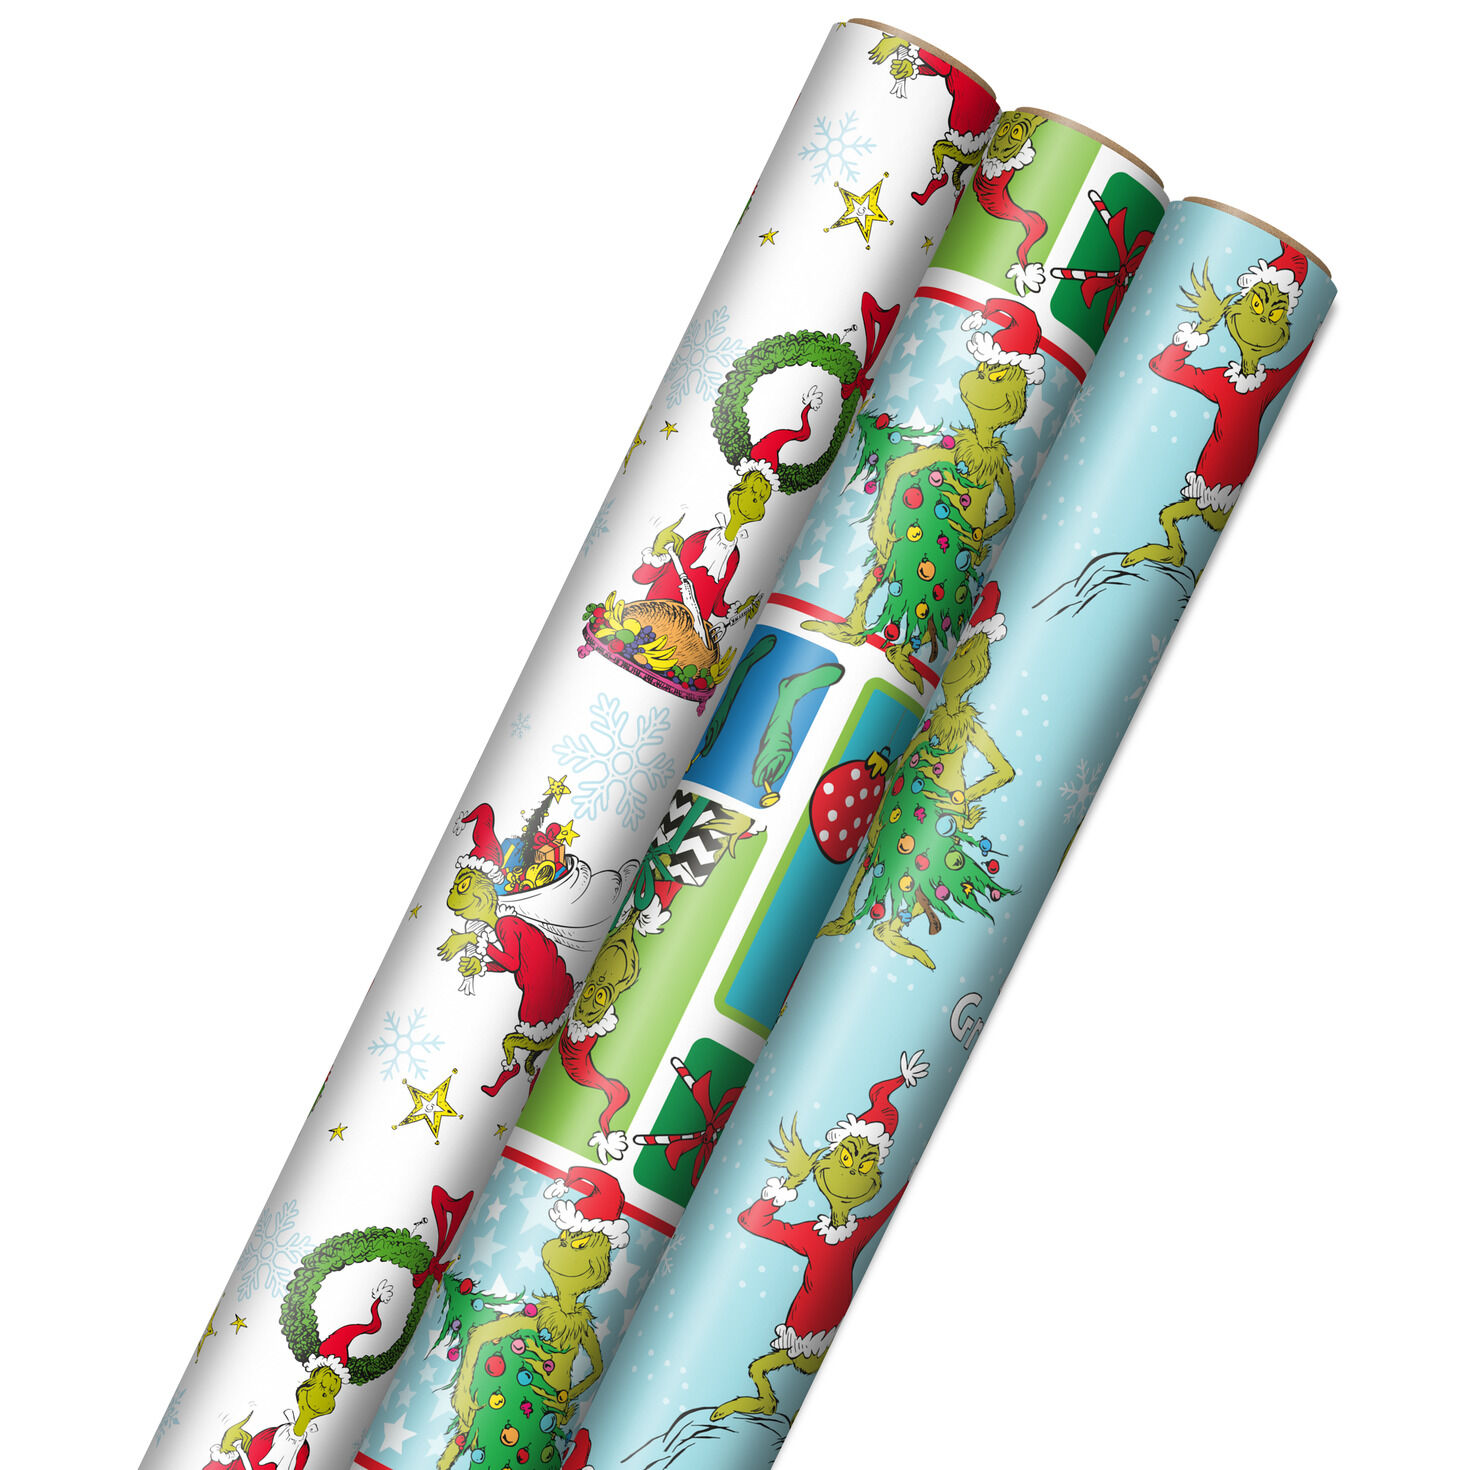 https://www.hallmark.com/dw/image/v2/AALB_PRD/on/demandware.static/-/Sites-hallmark-master/default/dw18c735ca/images/finished-goods/products/5JXW1211/Grinch-3Pack-Christmas-Wrapping-Paper_5JXW1211_01.jpg?sfrm=jpg